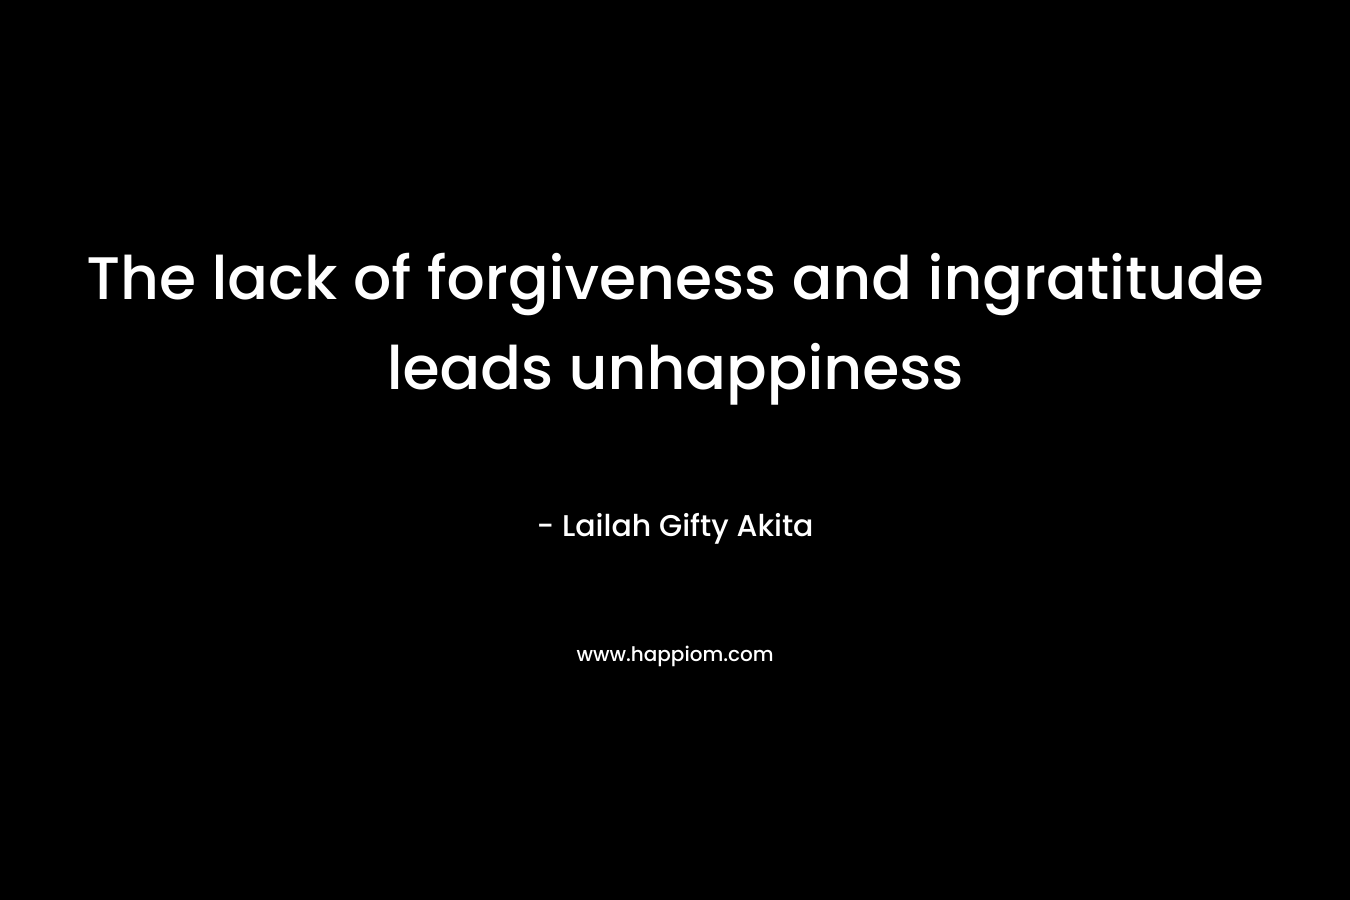 The lack of forgiveness and ingratitude leads unhappiness